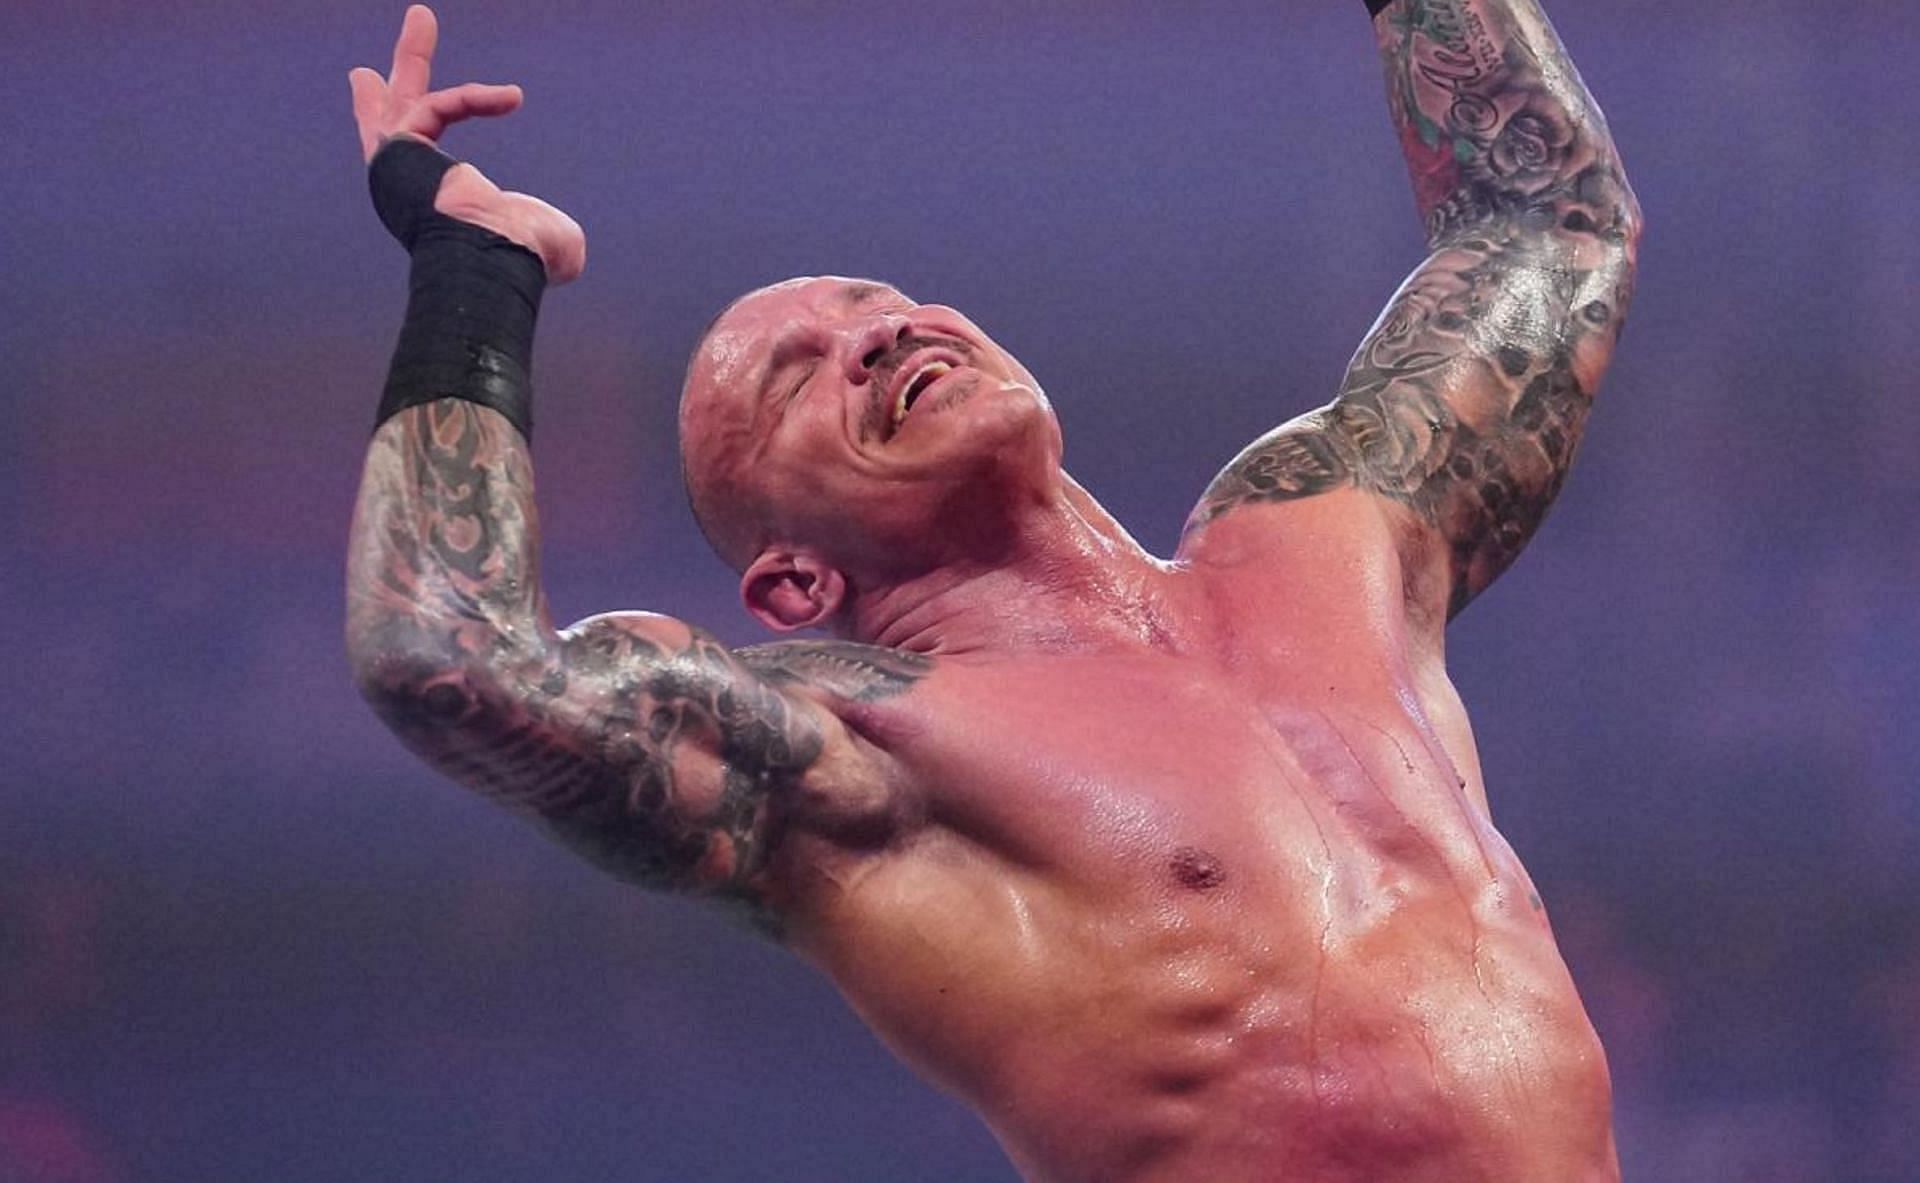 Randy Orton made a comeback to WWE after 18 months at Survivor Series: WarGames